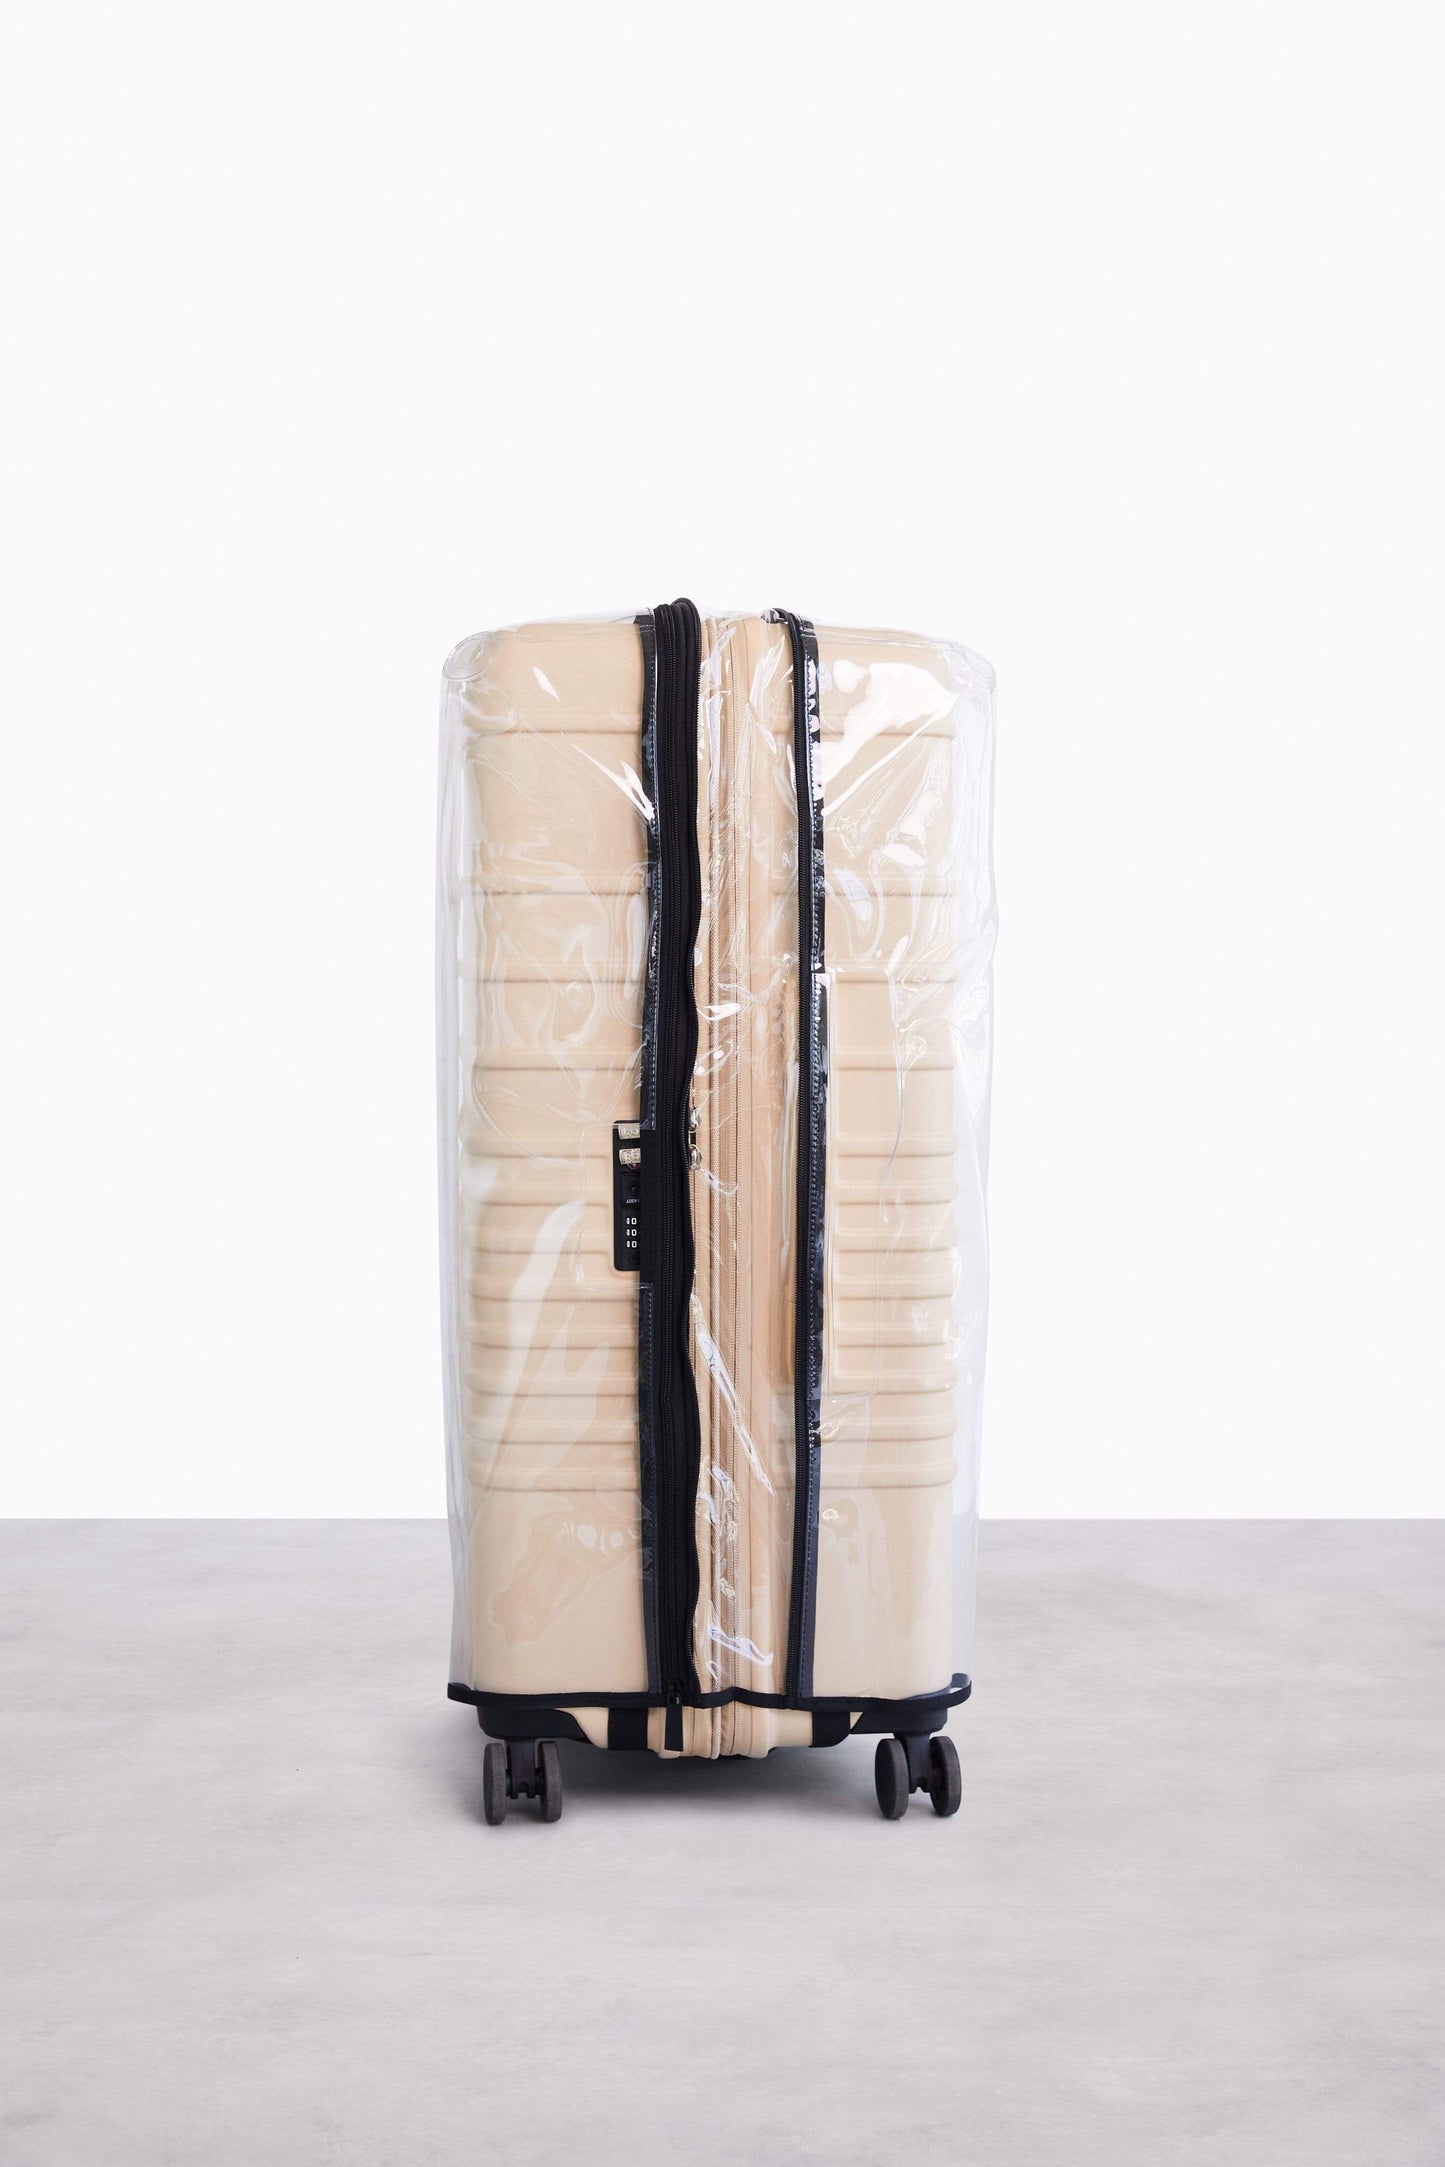 The 29" Large Luggage Cover